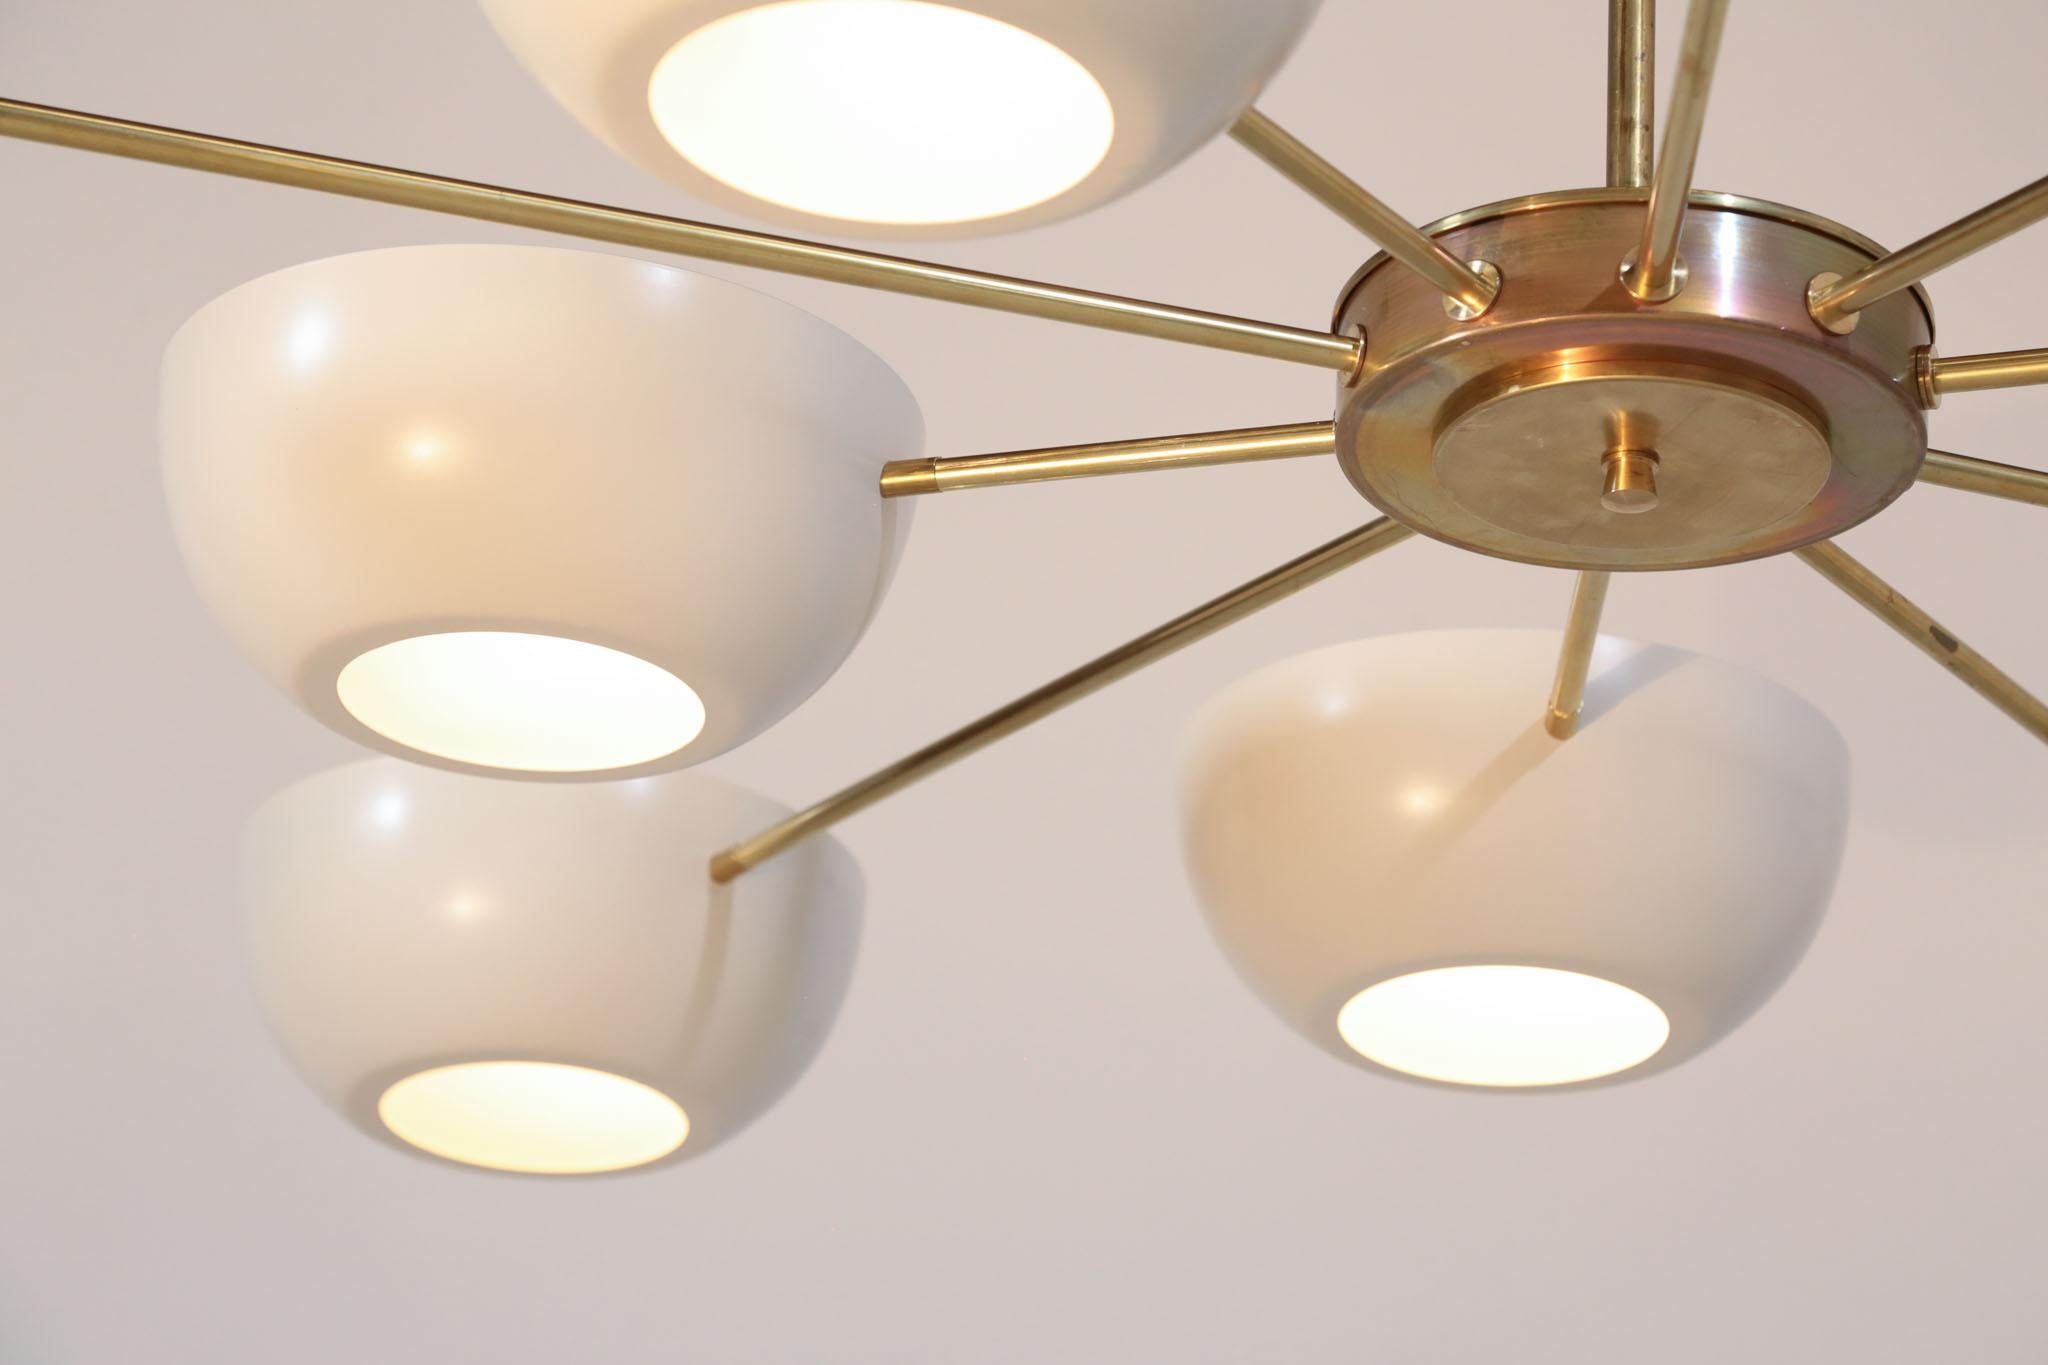 Large Italian Modern Chandelier with 10 Arms in Gino Sarfatti Style 